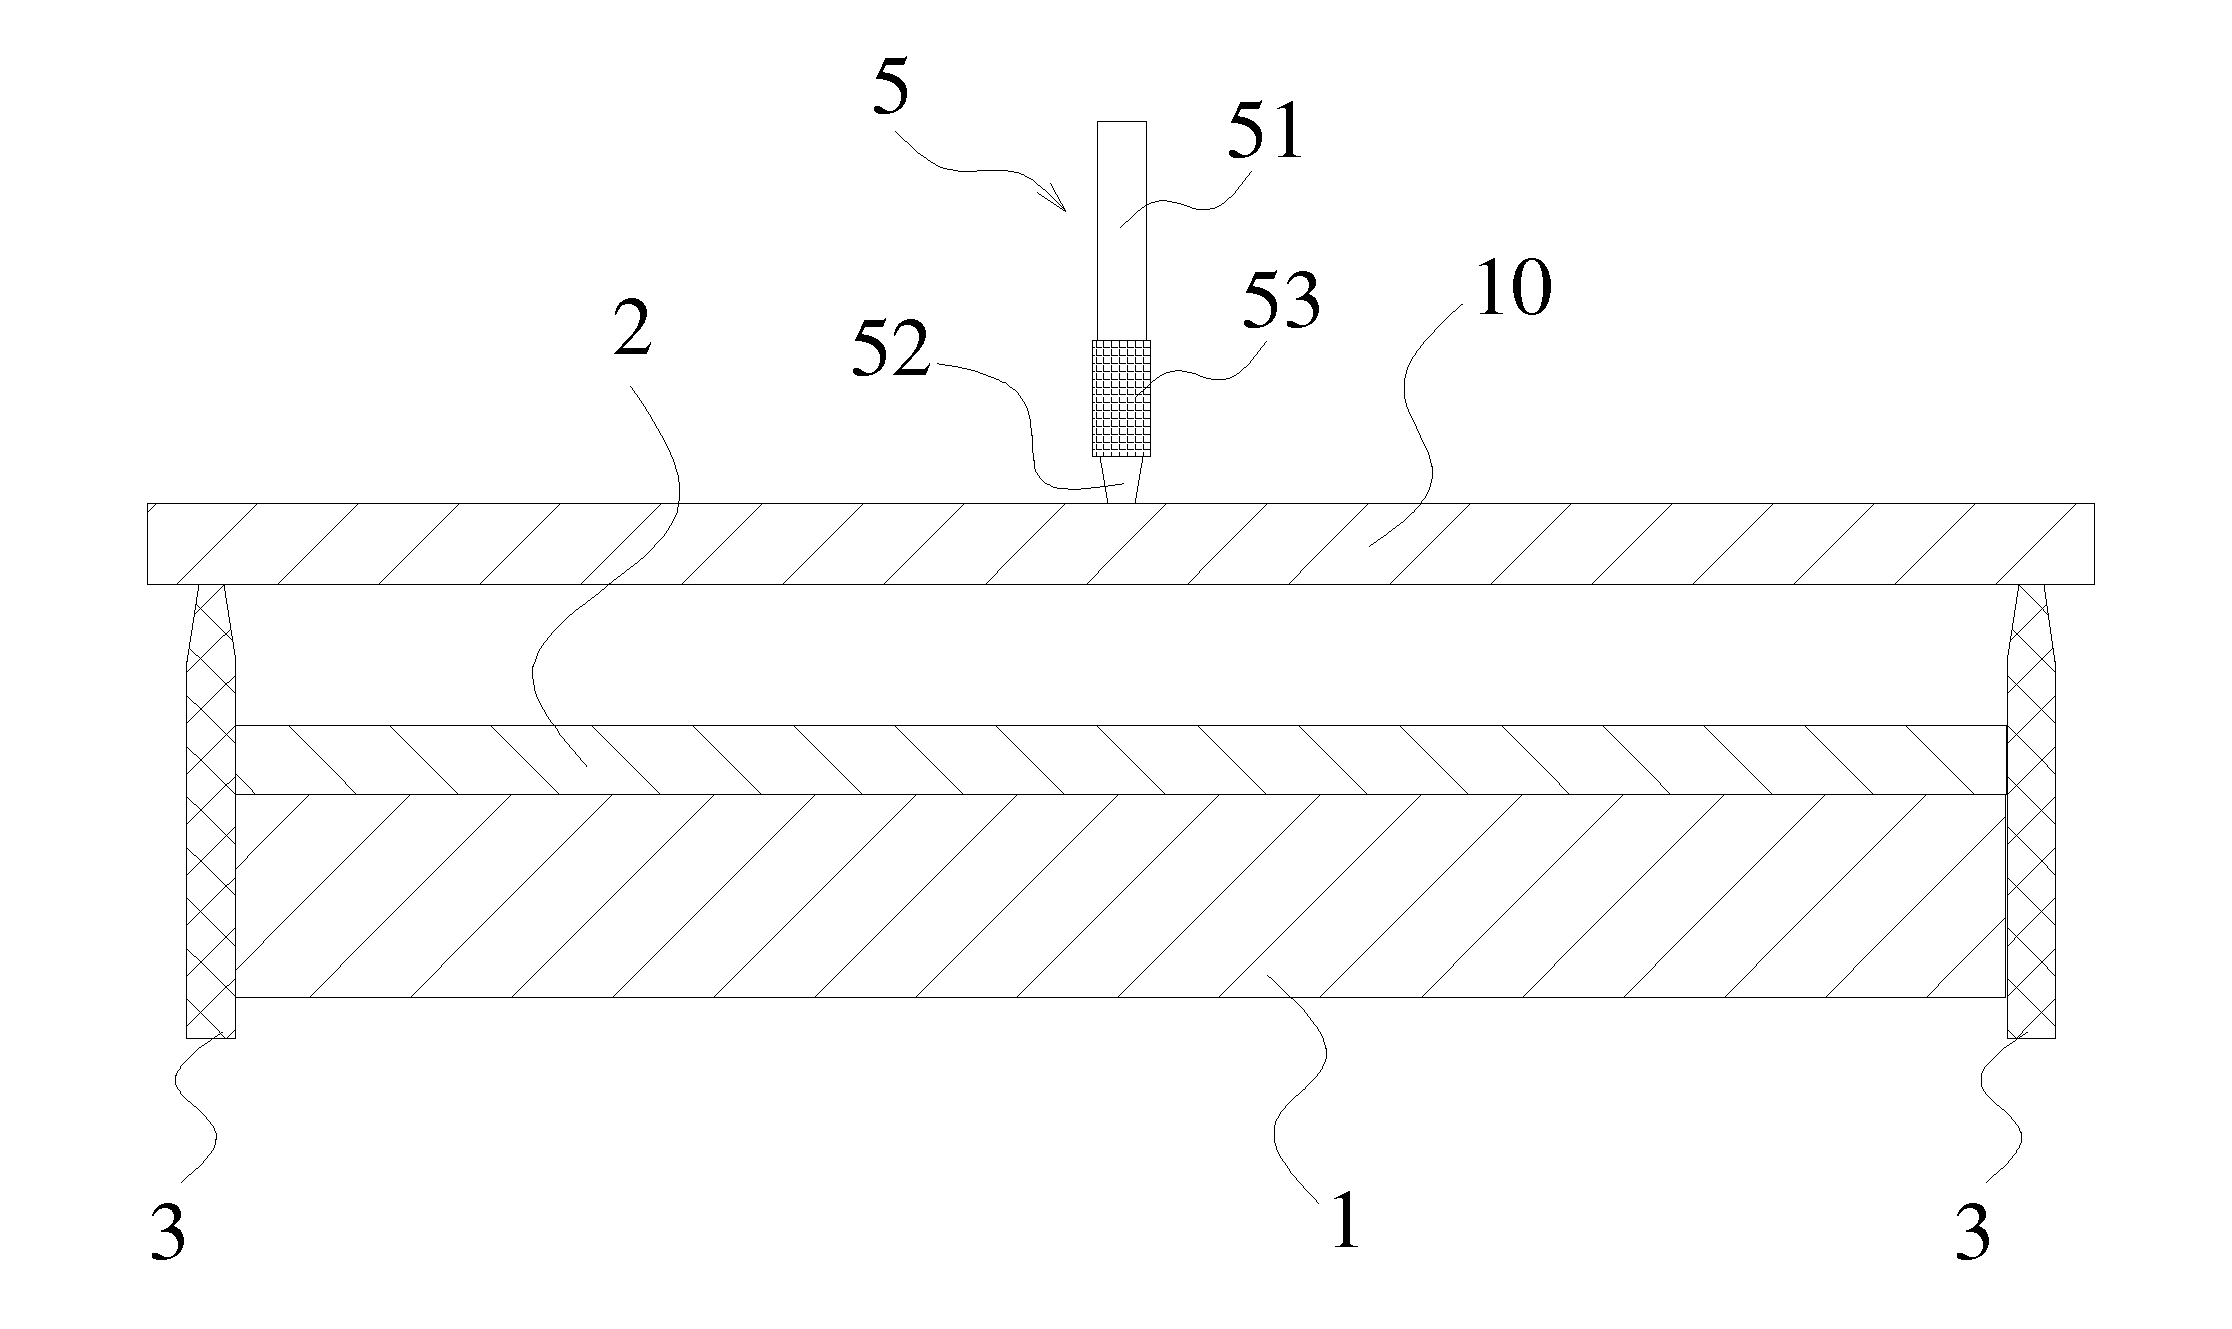 Lift mechanism for a glass substrate in an exposure machine